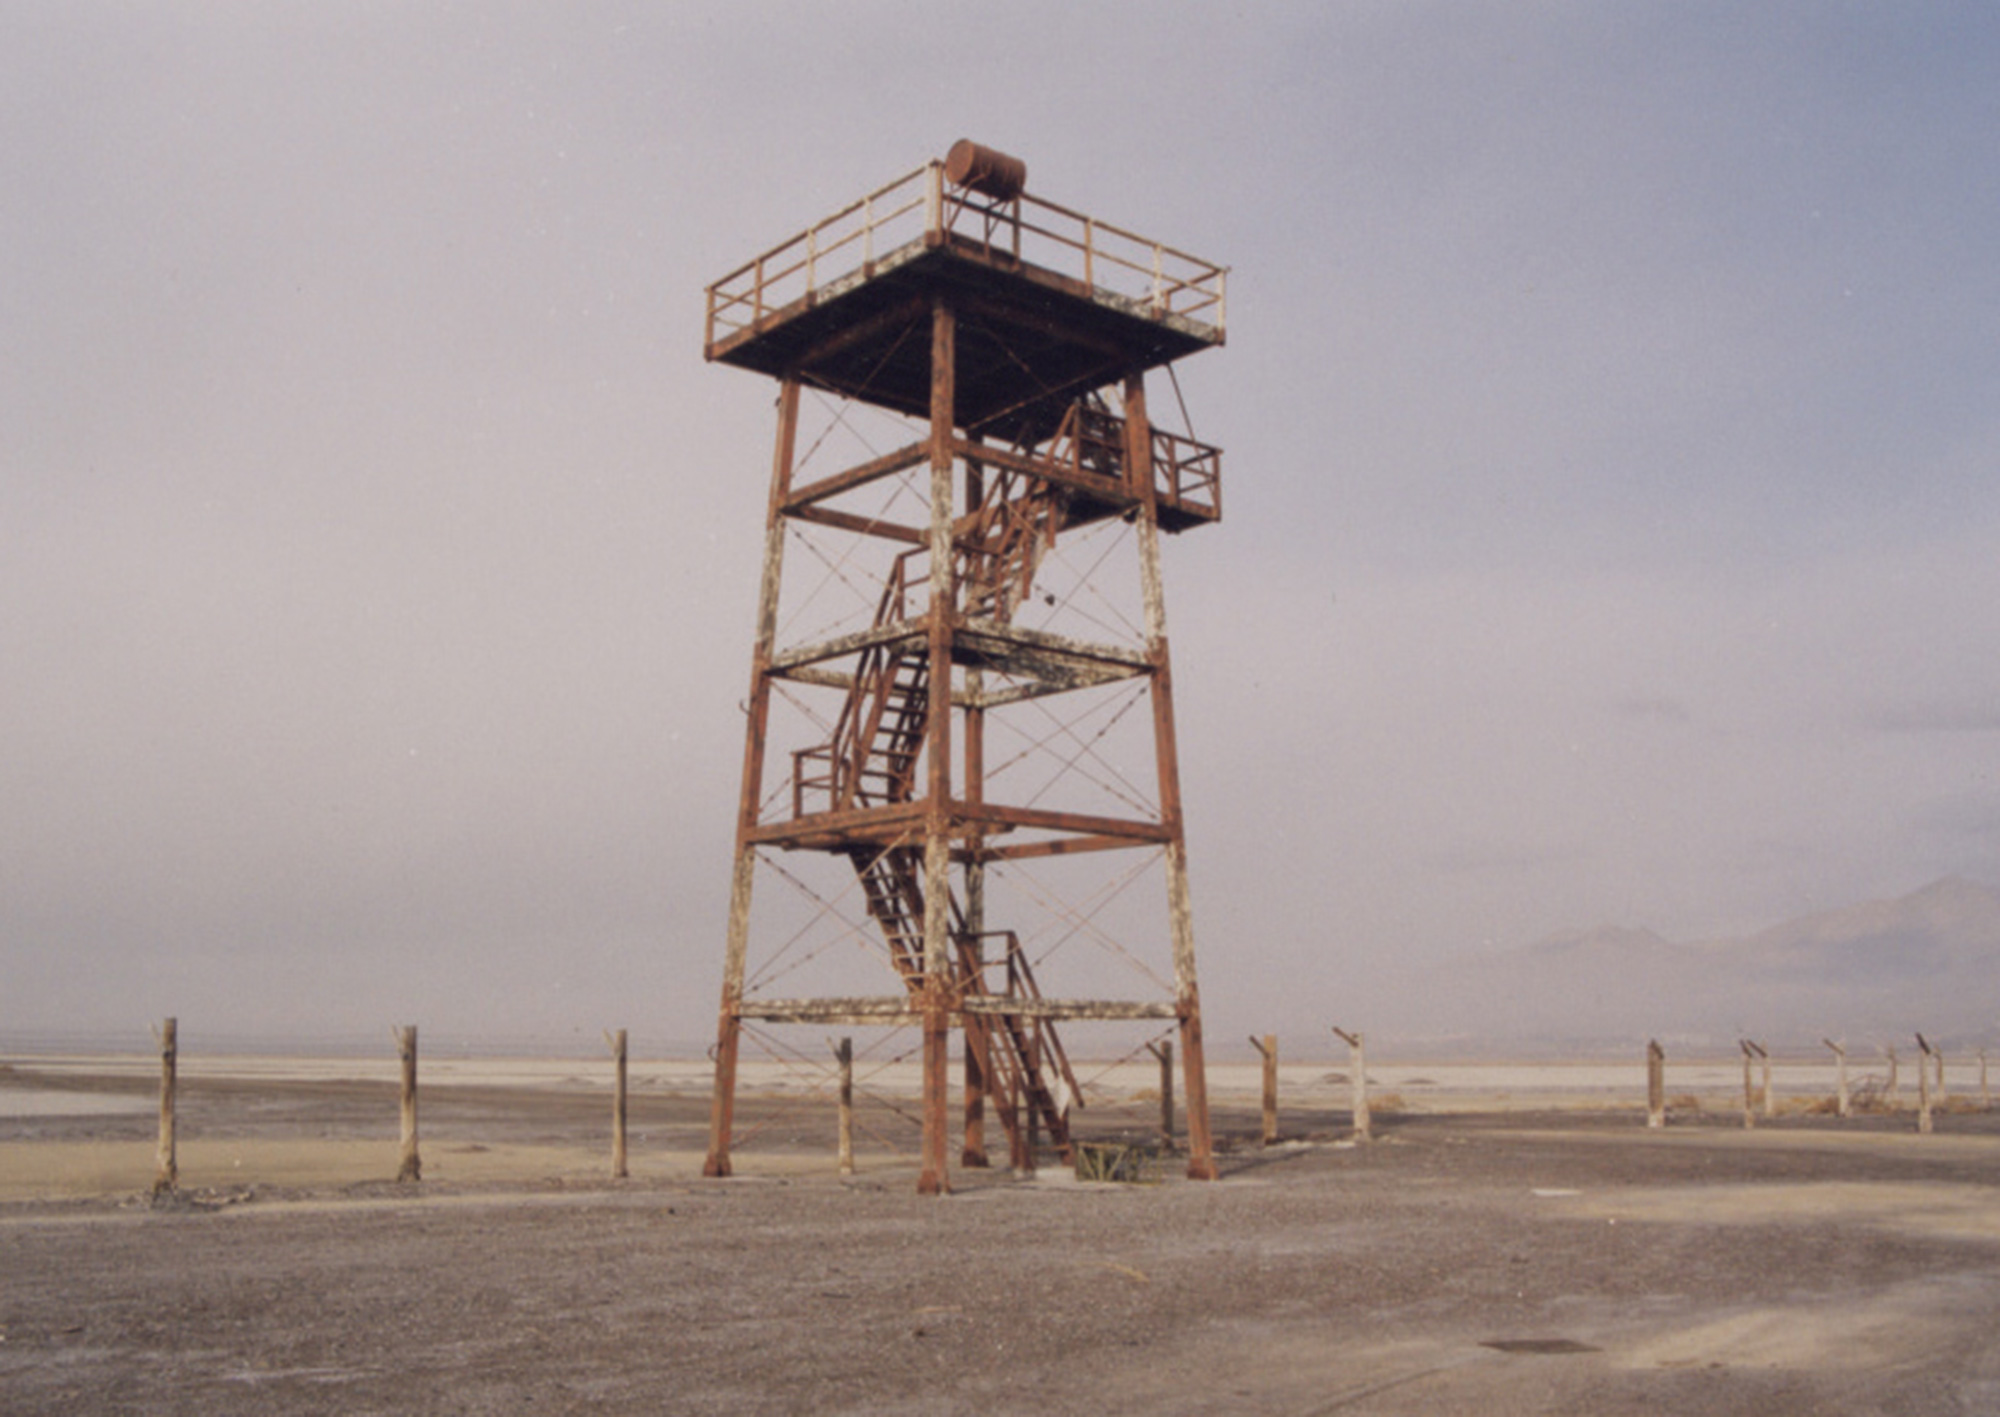 A photograph of a “Con Air” film set prop tower.